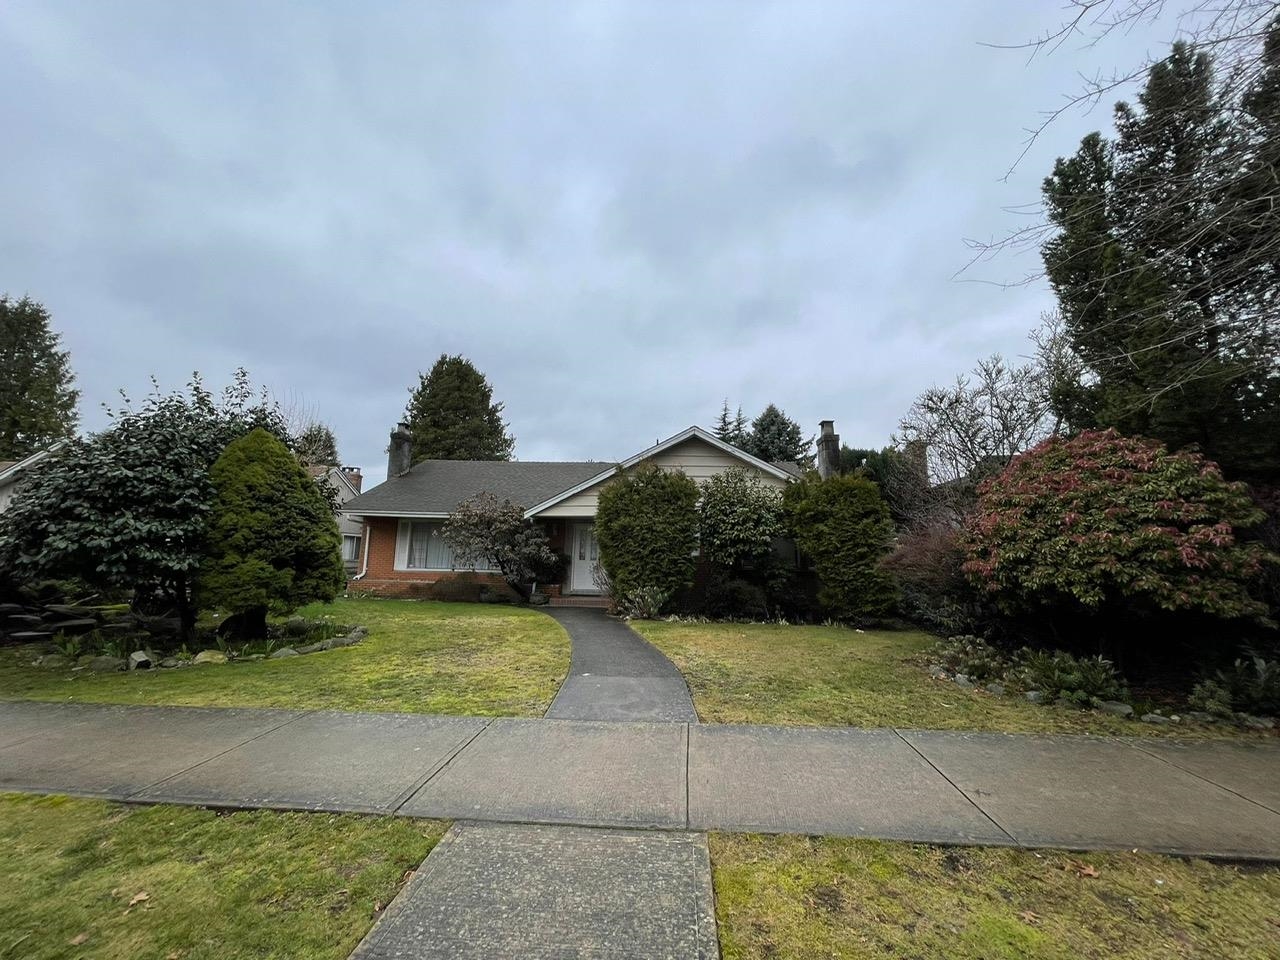 Listing image of 5855 WILLOW STREET